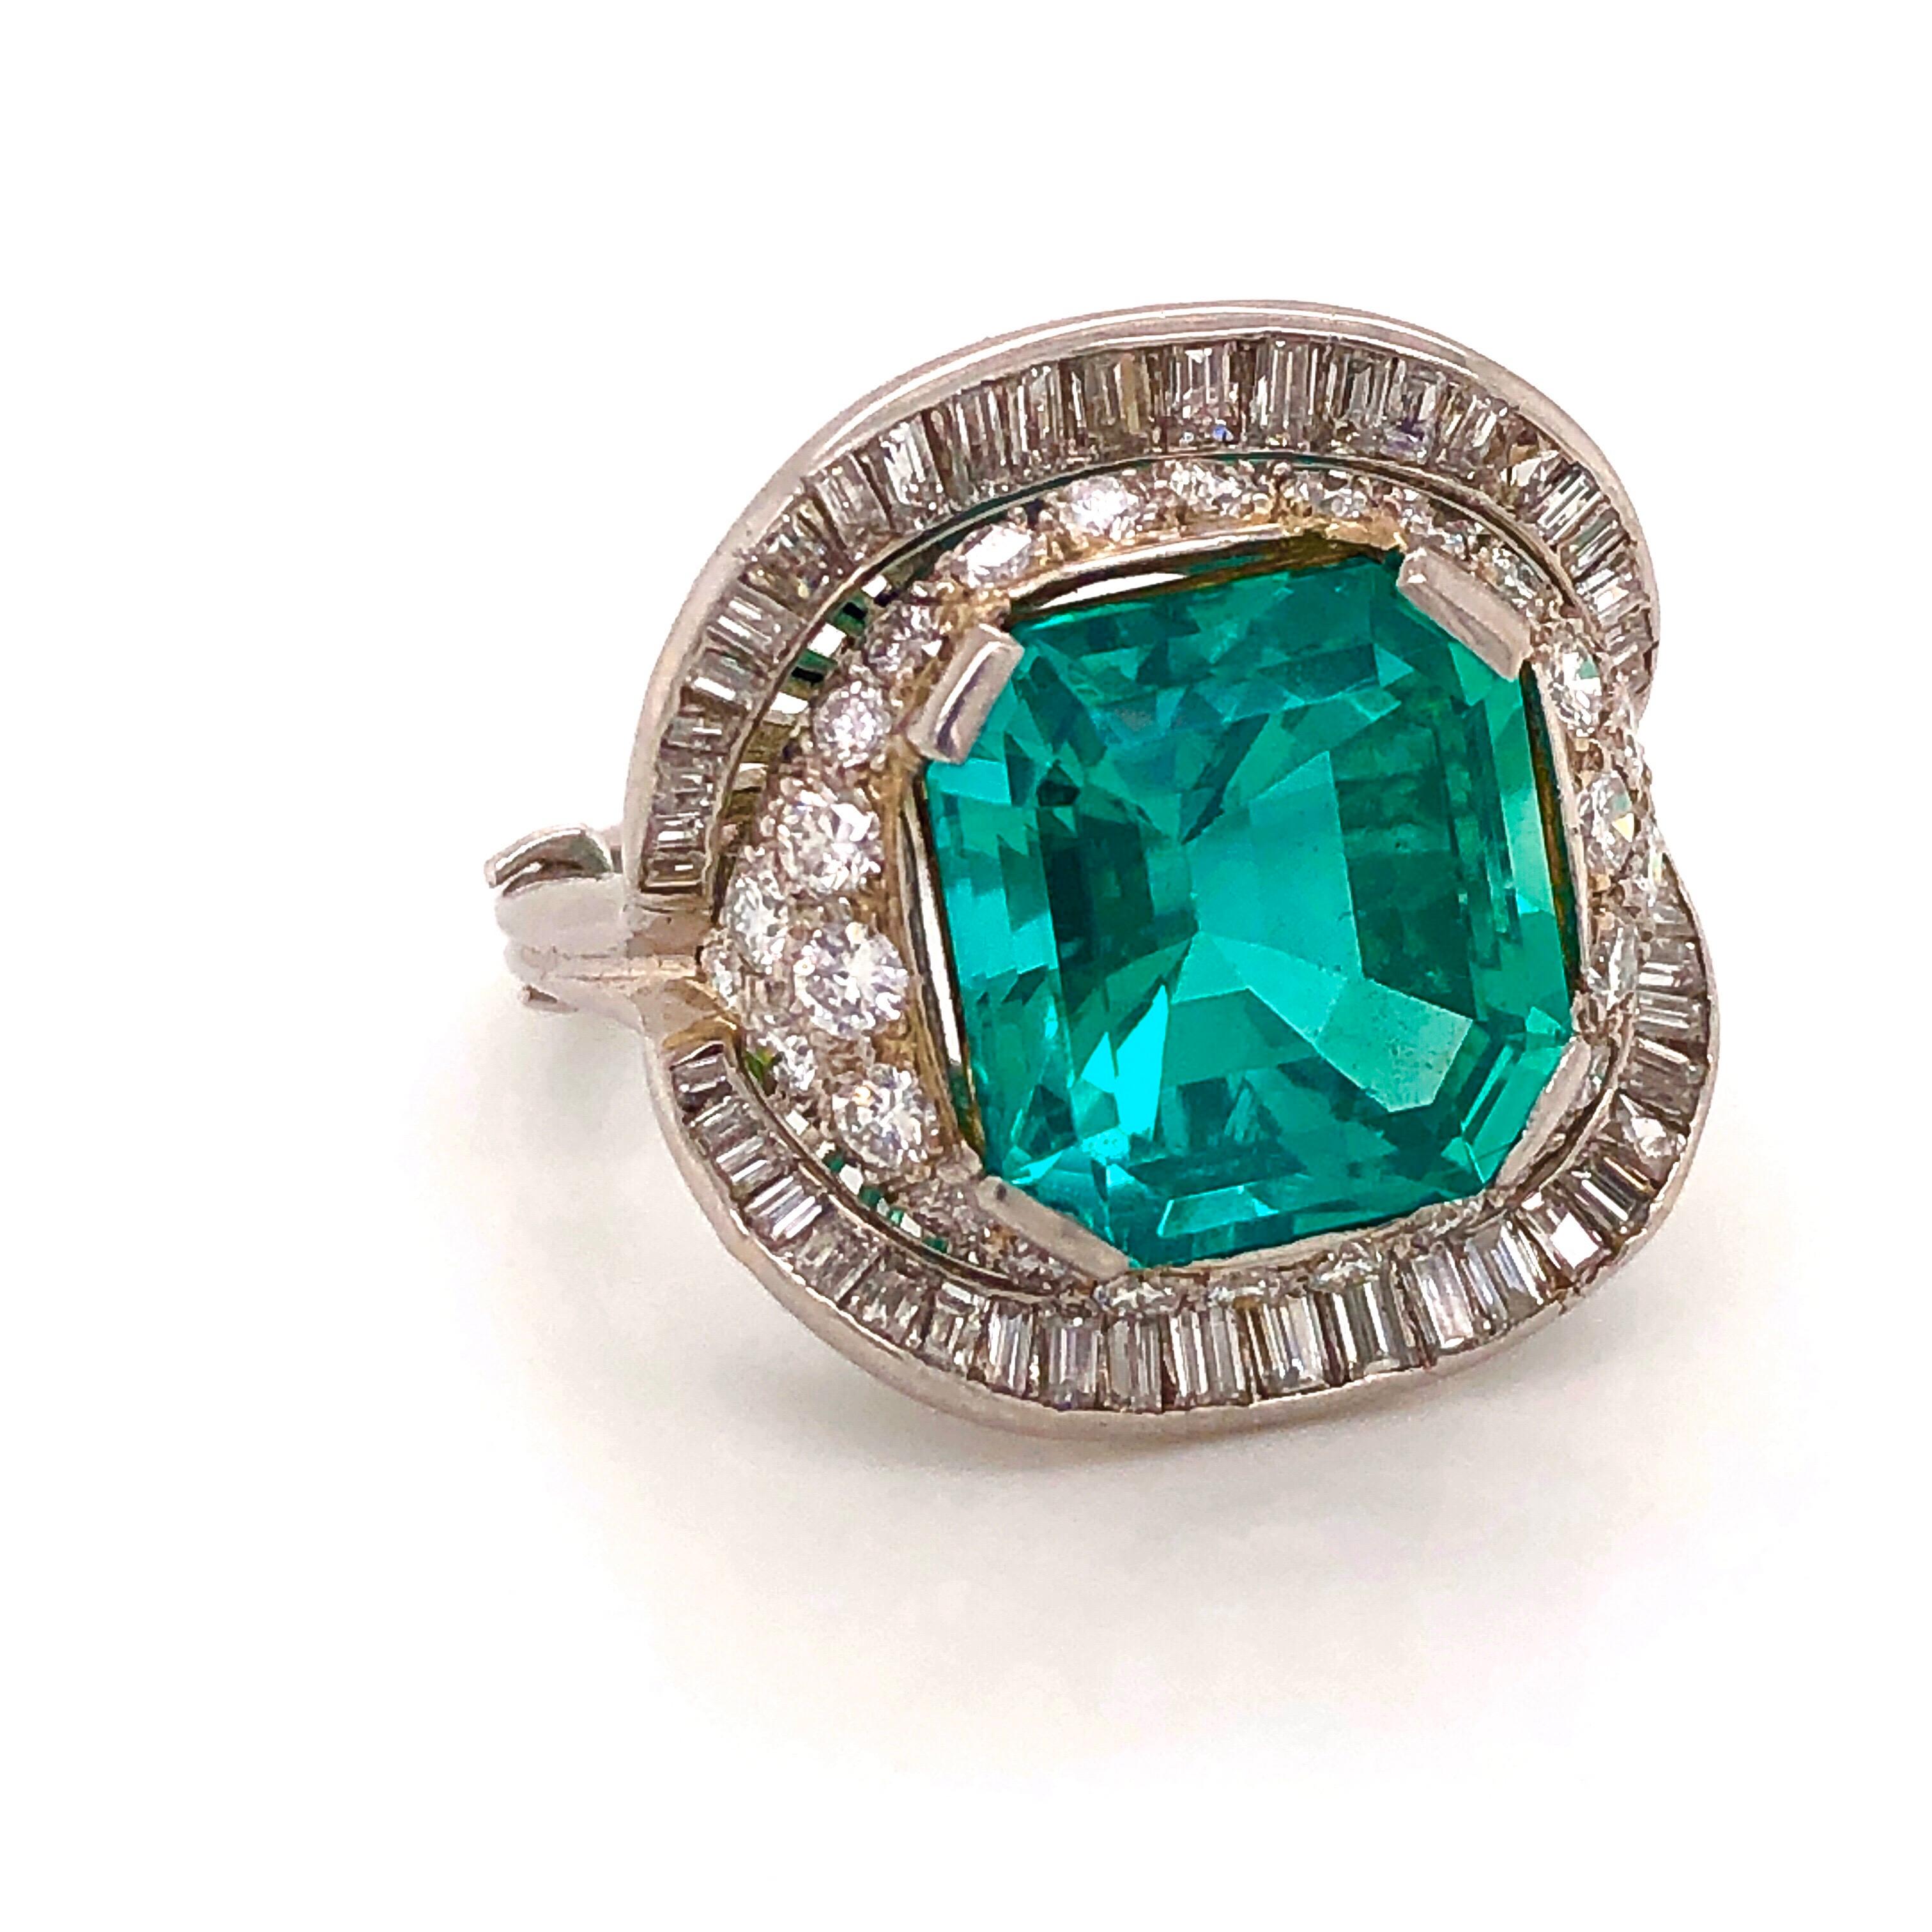 Featuring an octagon cut No oil & Untreated Colombian Emerald weighing over 7 Carats. With the diamonds the approx total weight of this ring is 9.08 carats. Emilio Jewelry specializes in Emeralds, and investment no oil pieces such as this one.